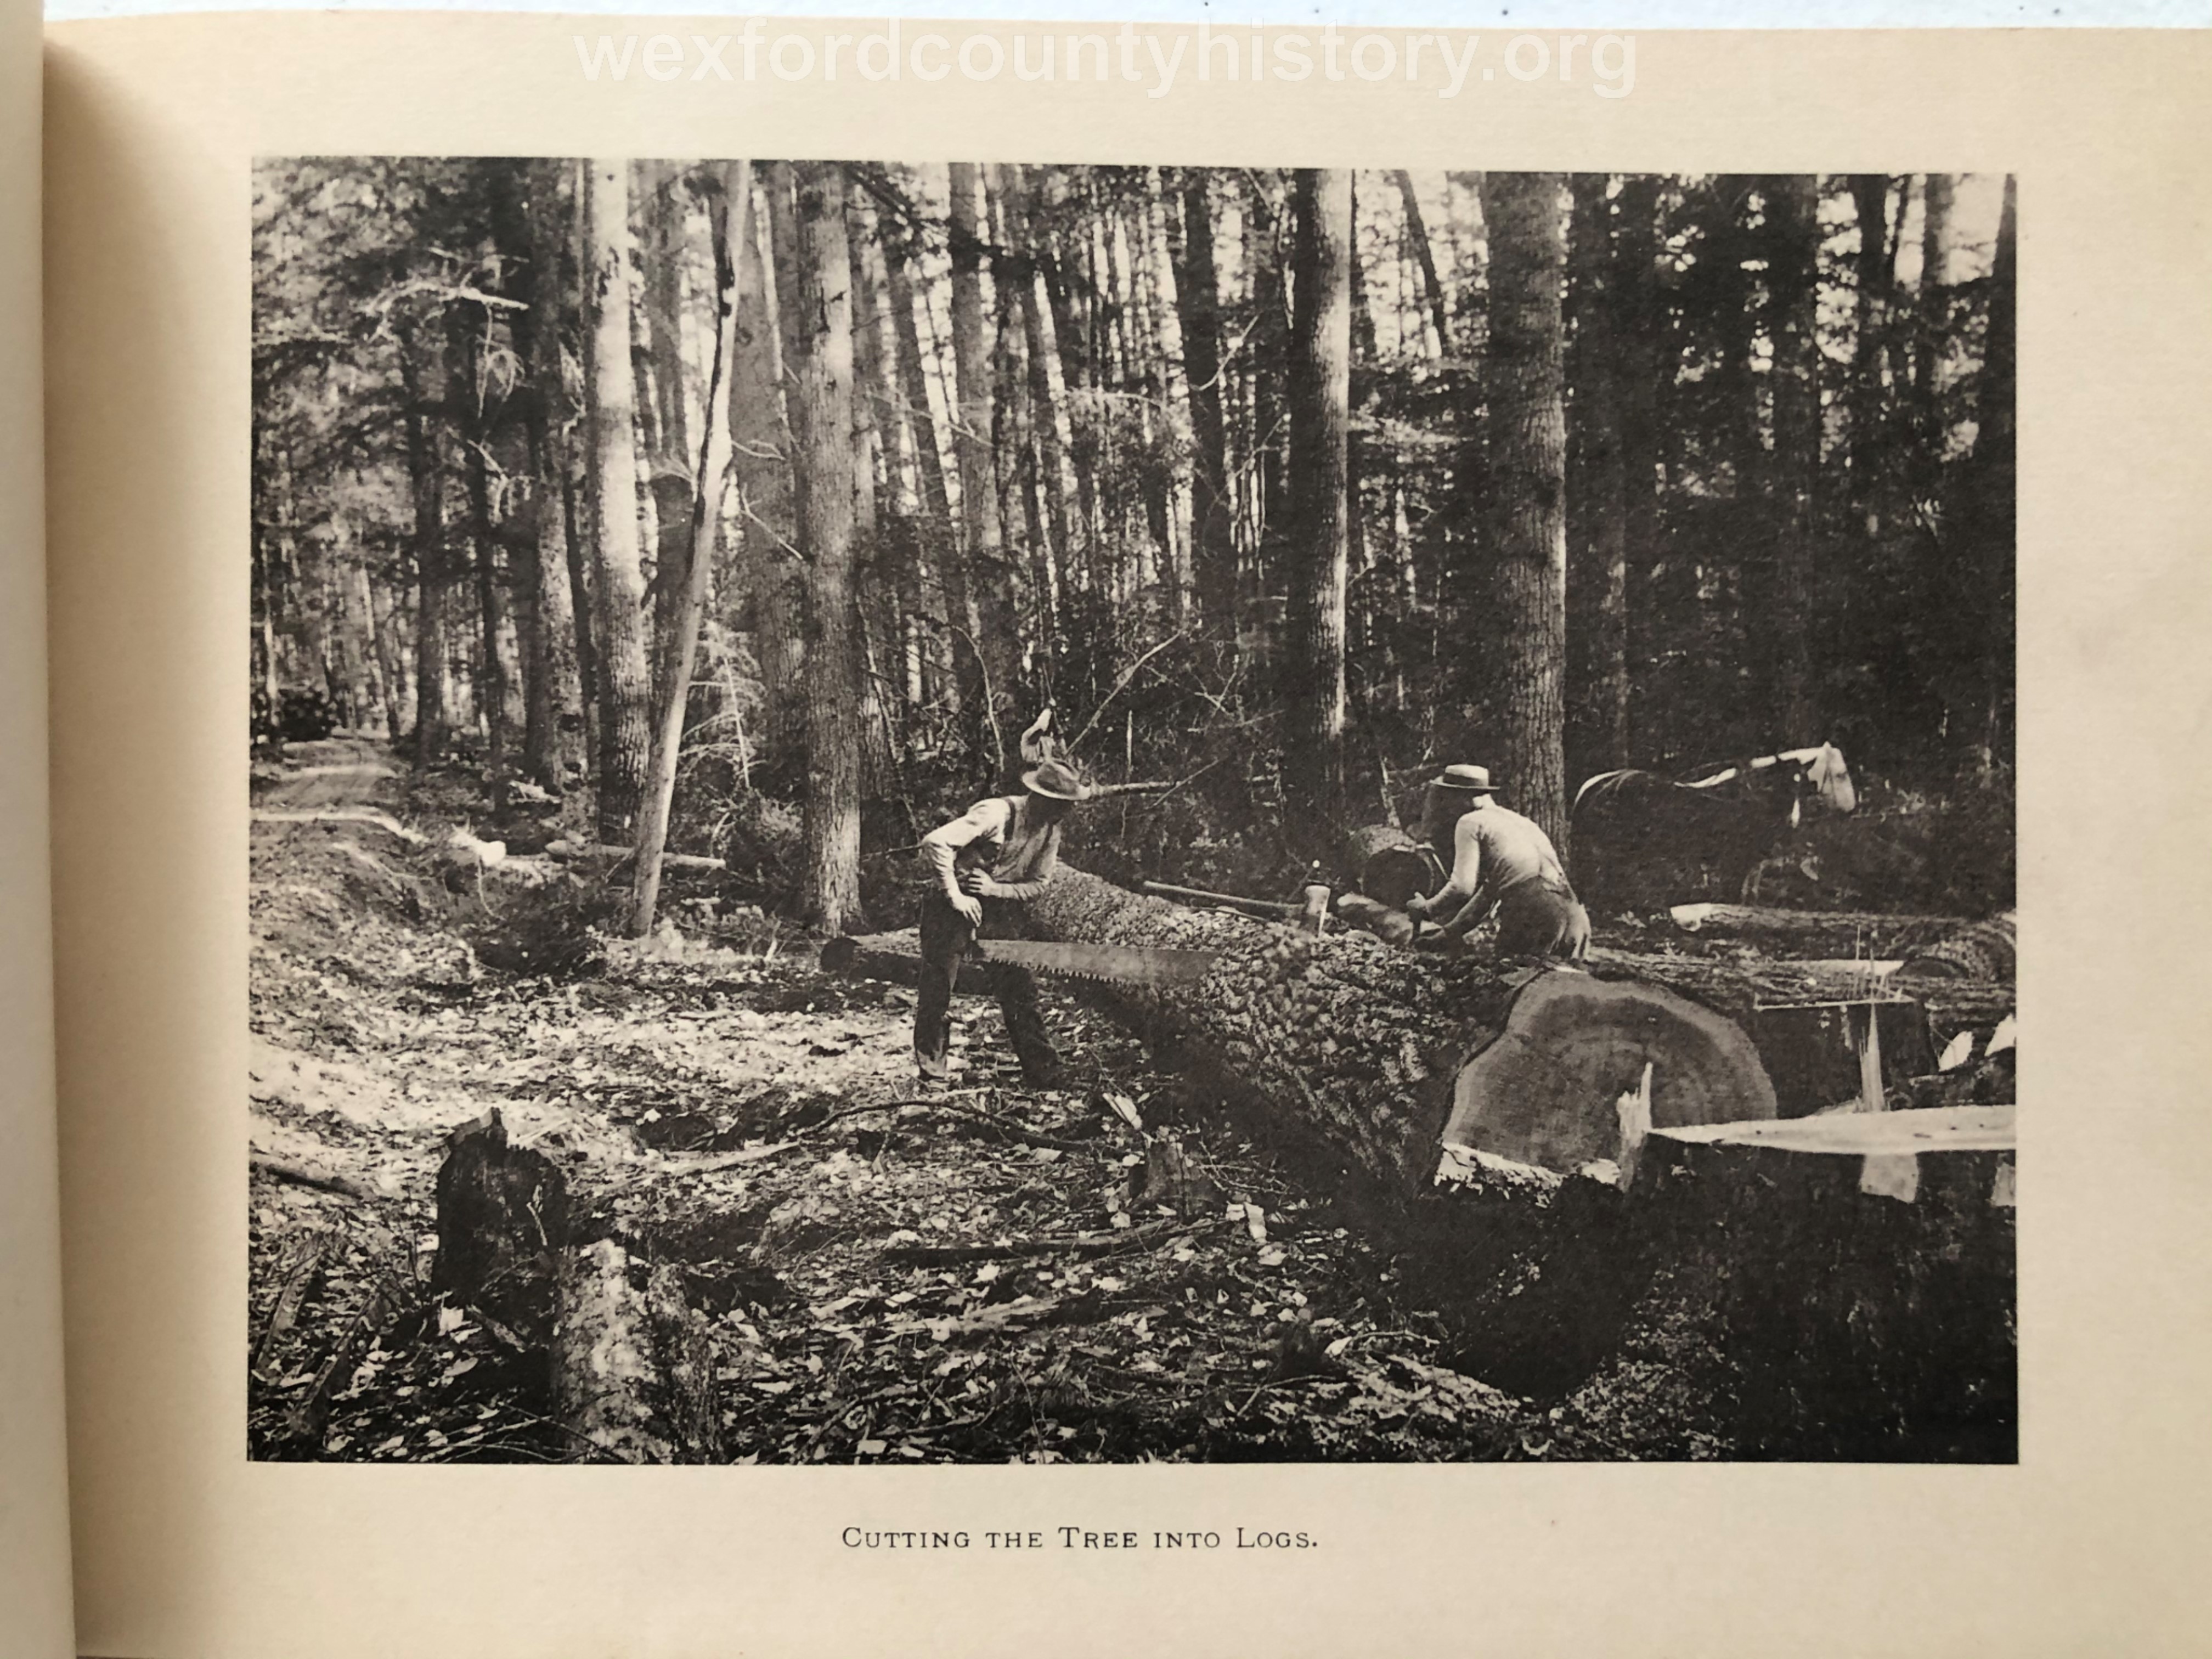 Cadillac-Lumber-Cummer-Workers-Cutting-A-Tree-Into-Logs-circa-1891